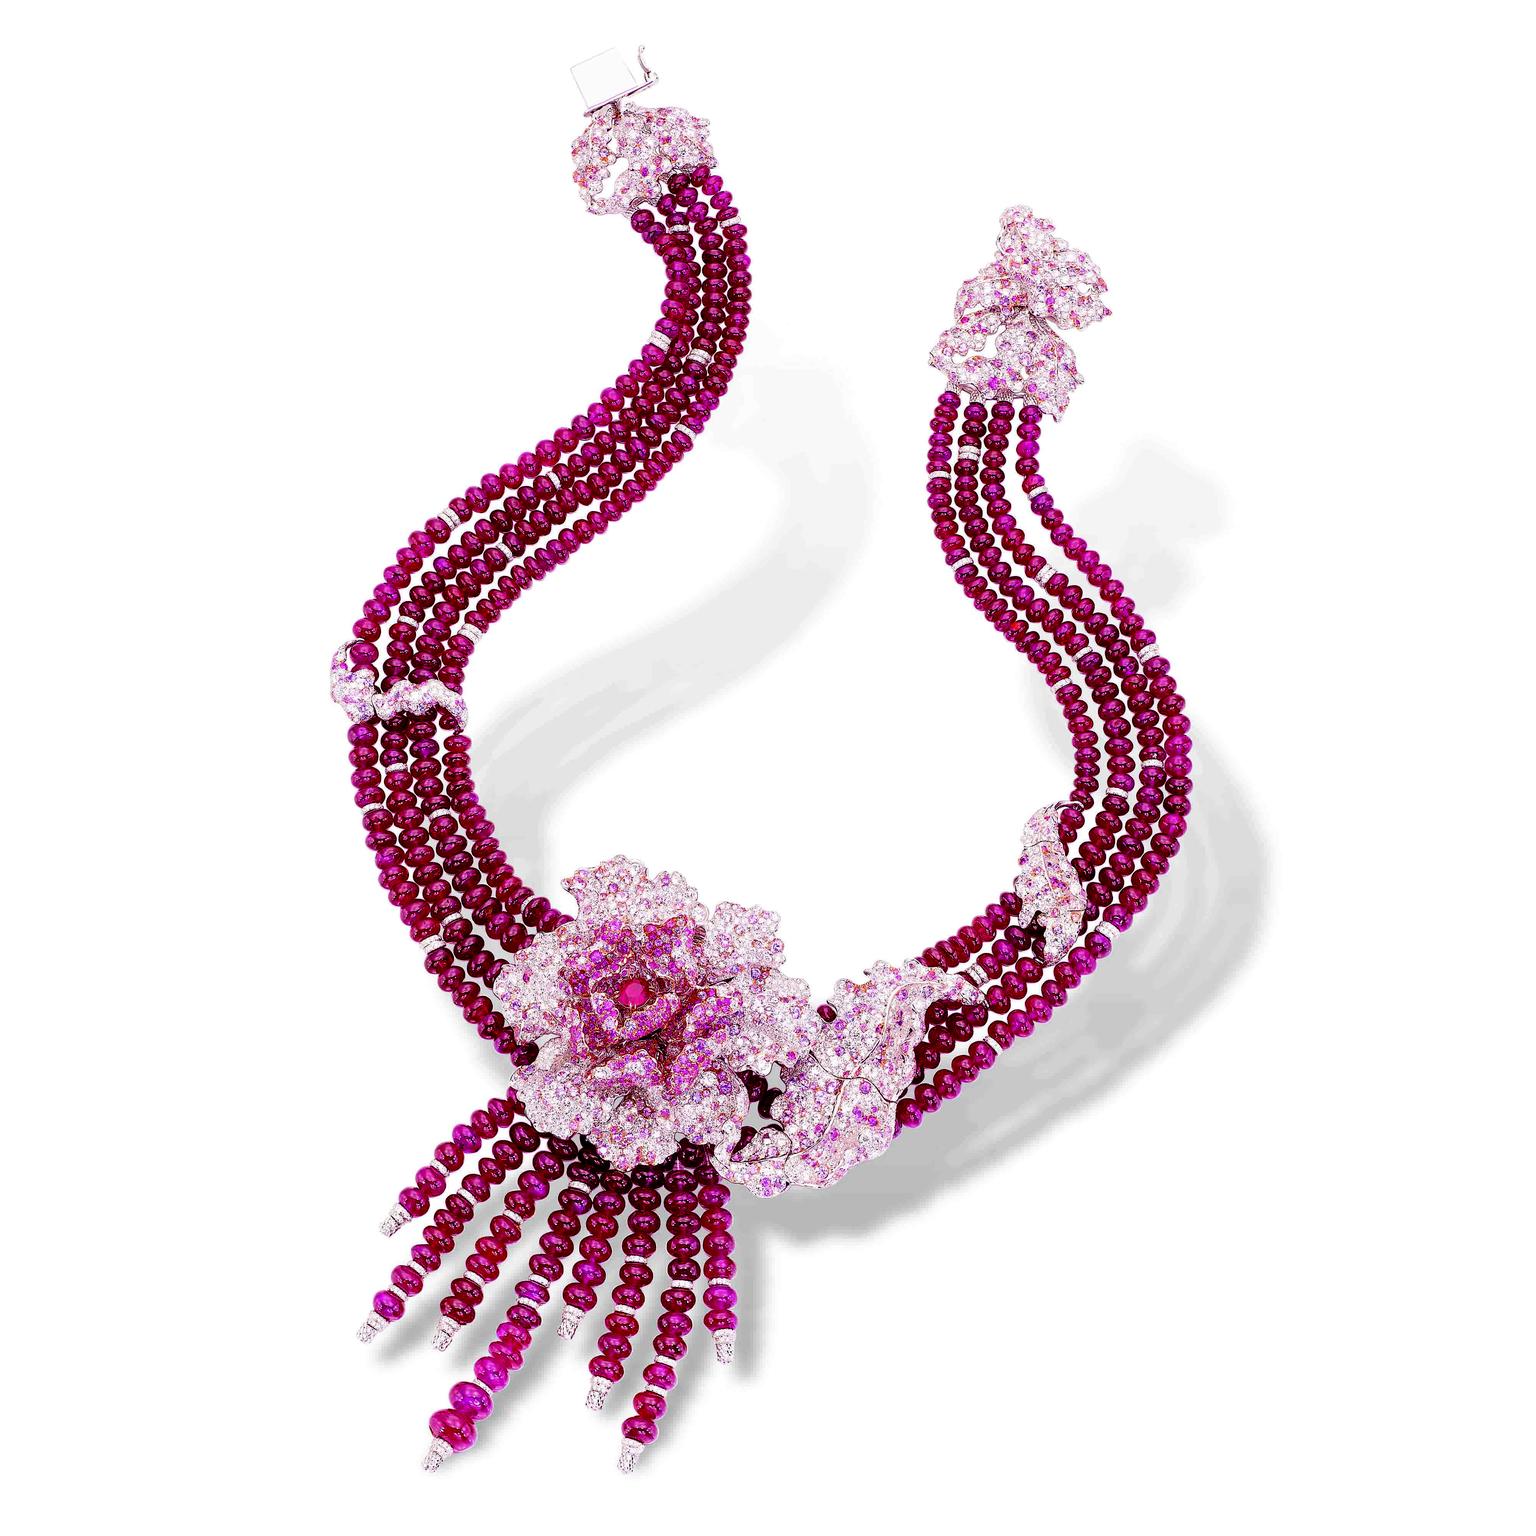 La Rose Rouge Necklace inspired by Chou Konglei by Anna Hu